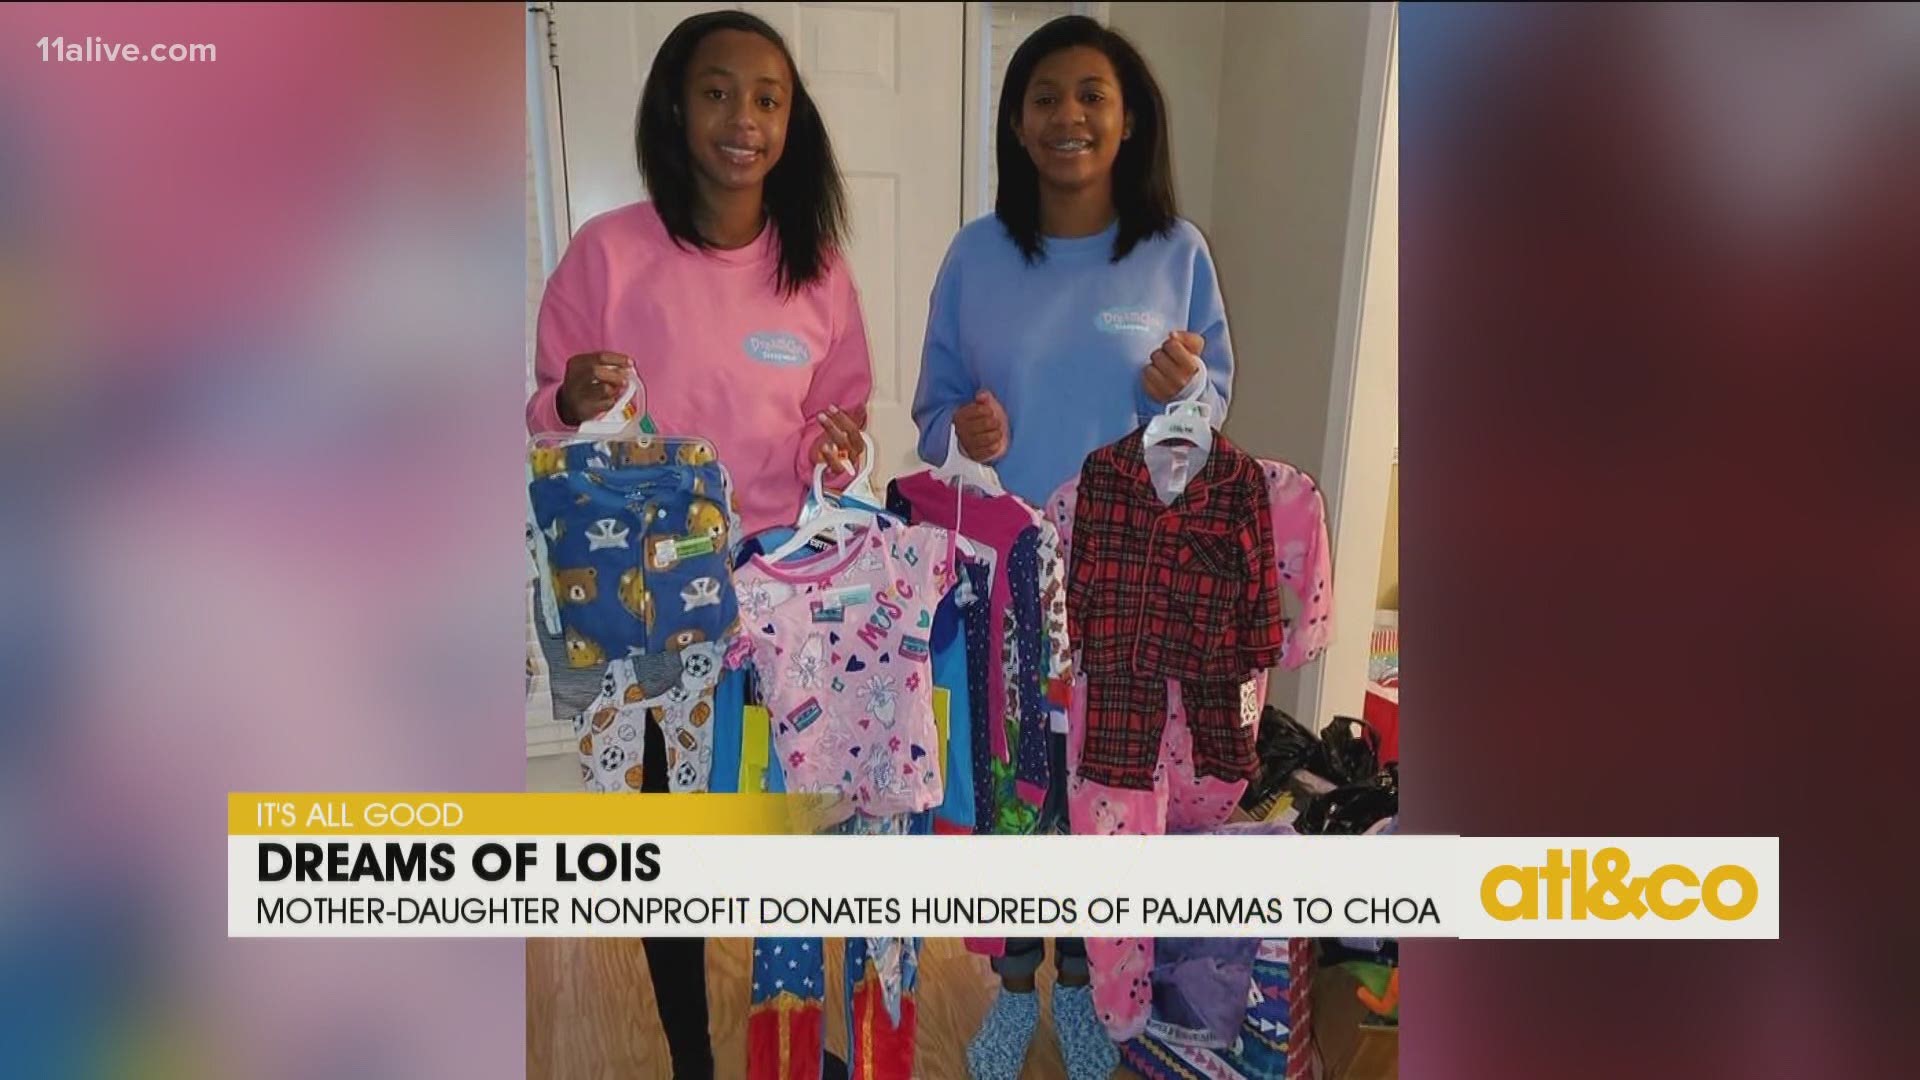 This local mother/daughter dream team is unstoppable! See how they're giving back by donating hundreds of pajamas to Children's Healthcare of Atlanta.